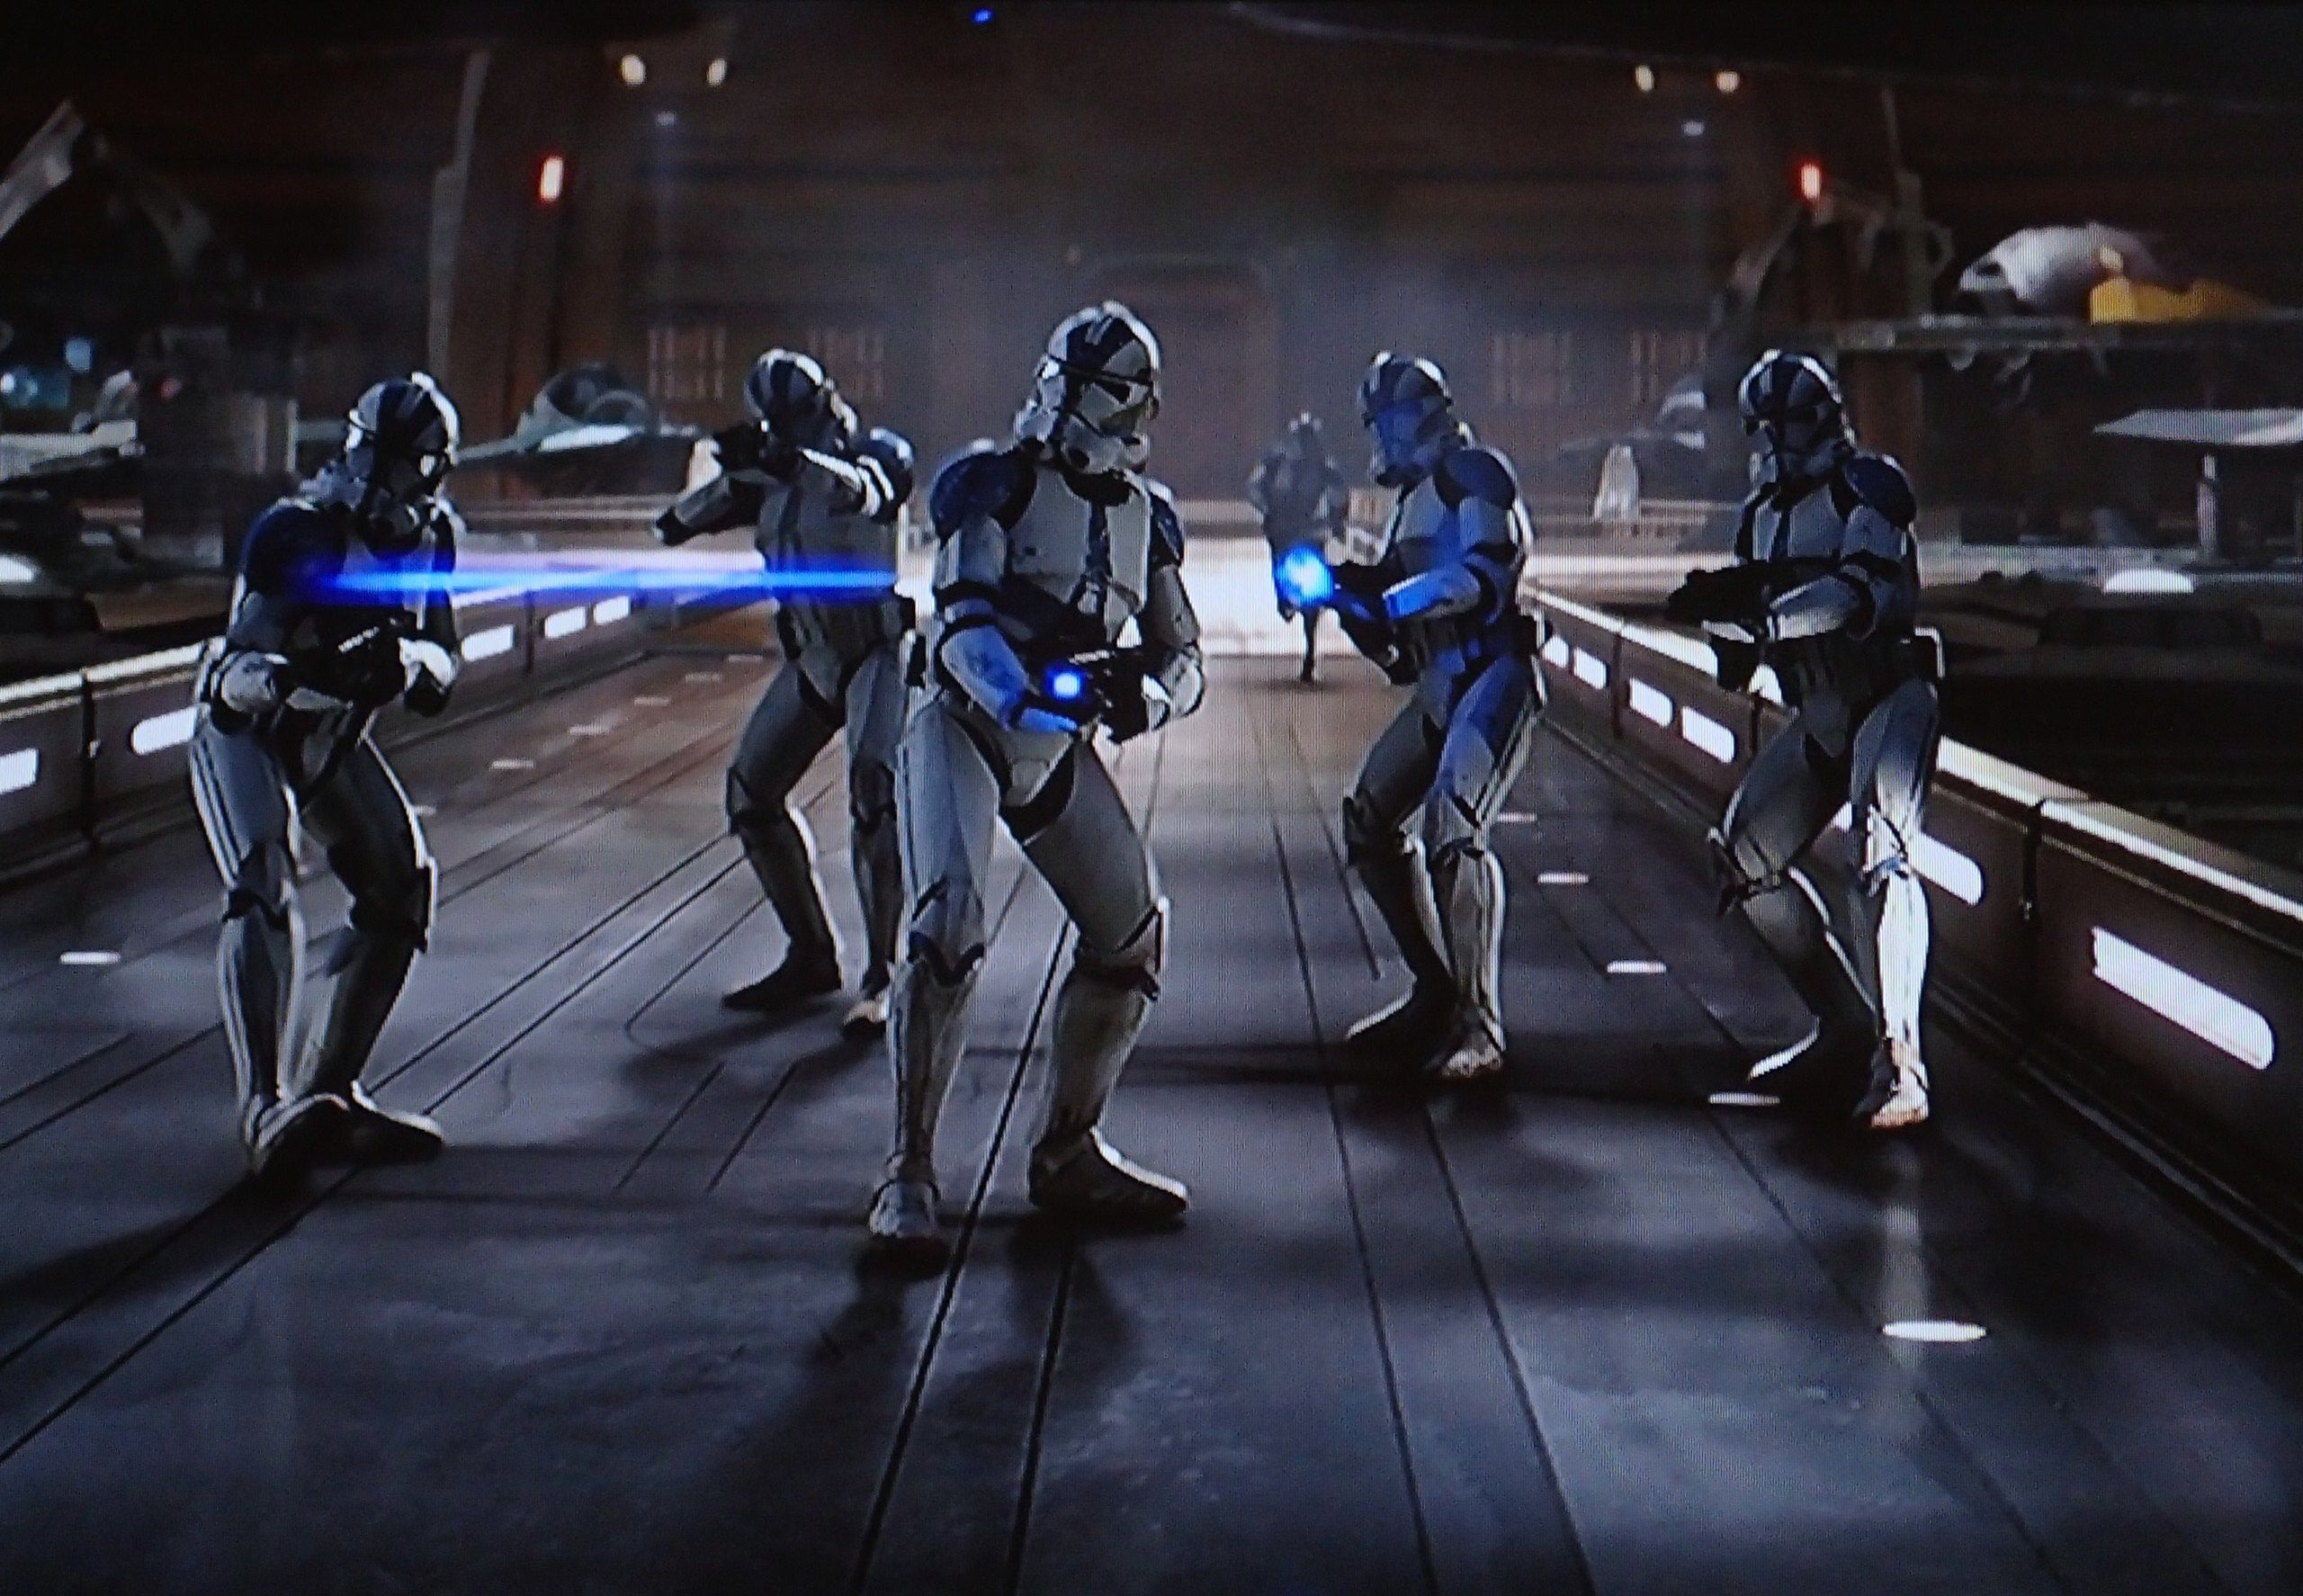 2560x1774 Star Wars Image Clonetroopers Hd Wallpaper And Background 501st Star Wars 2560x1774 Download Hd Wallpaper